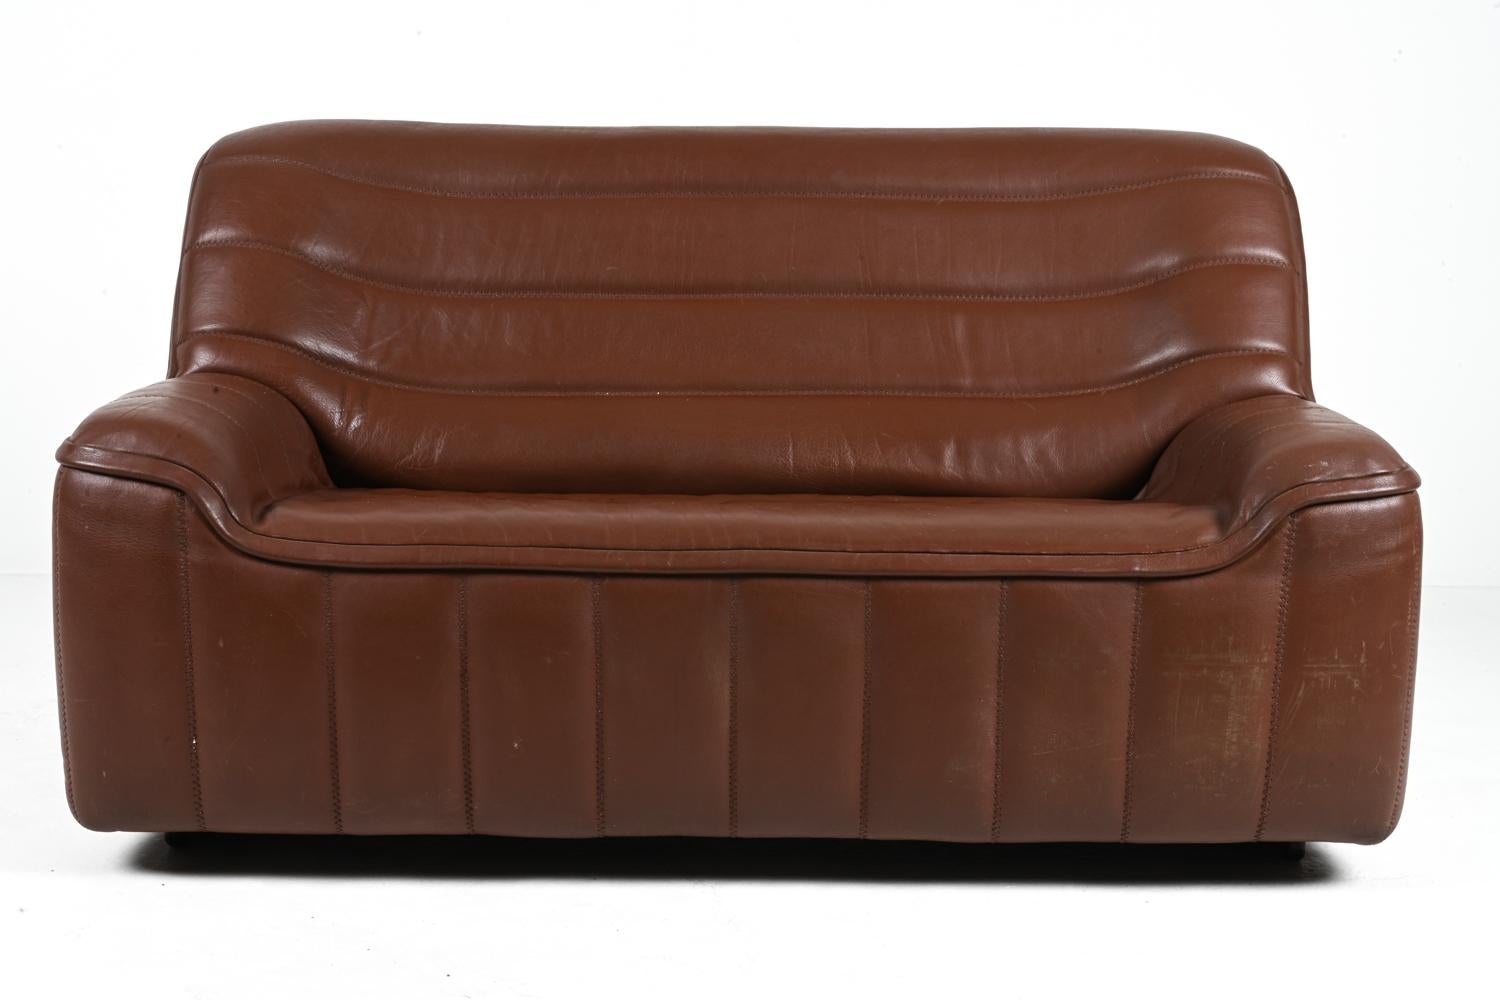 20th Century De Sede DS-84 Leather Two-Seat Sofa, c. 1970's For Sale